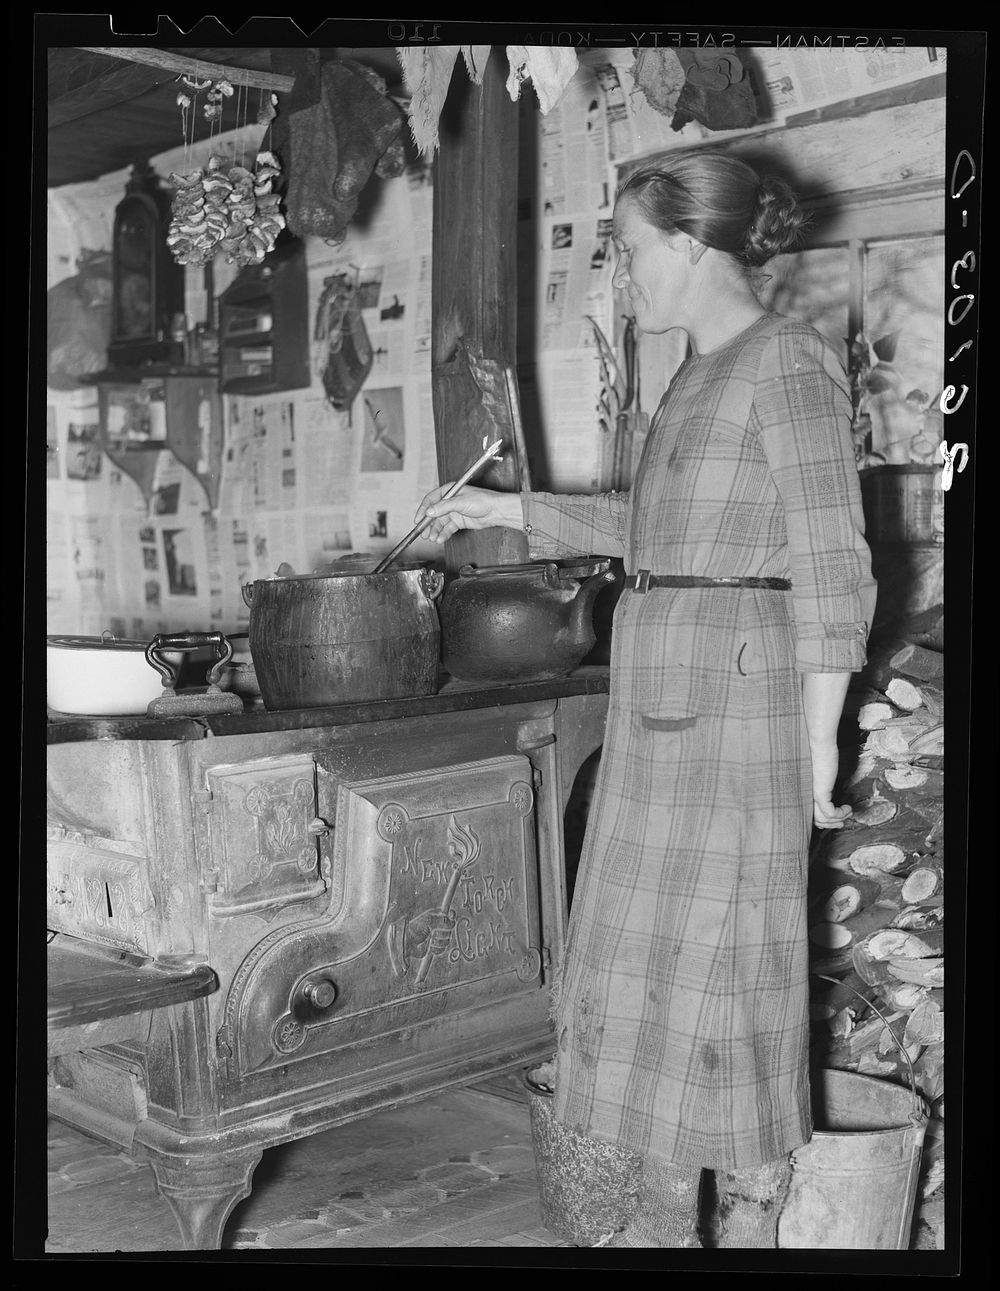 Daughter of Minnie Knox cooking soup. Garrett County, Maryland. Sourced from the Library of Congress.